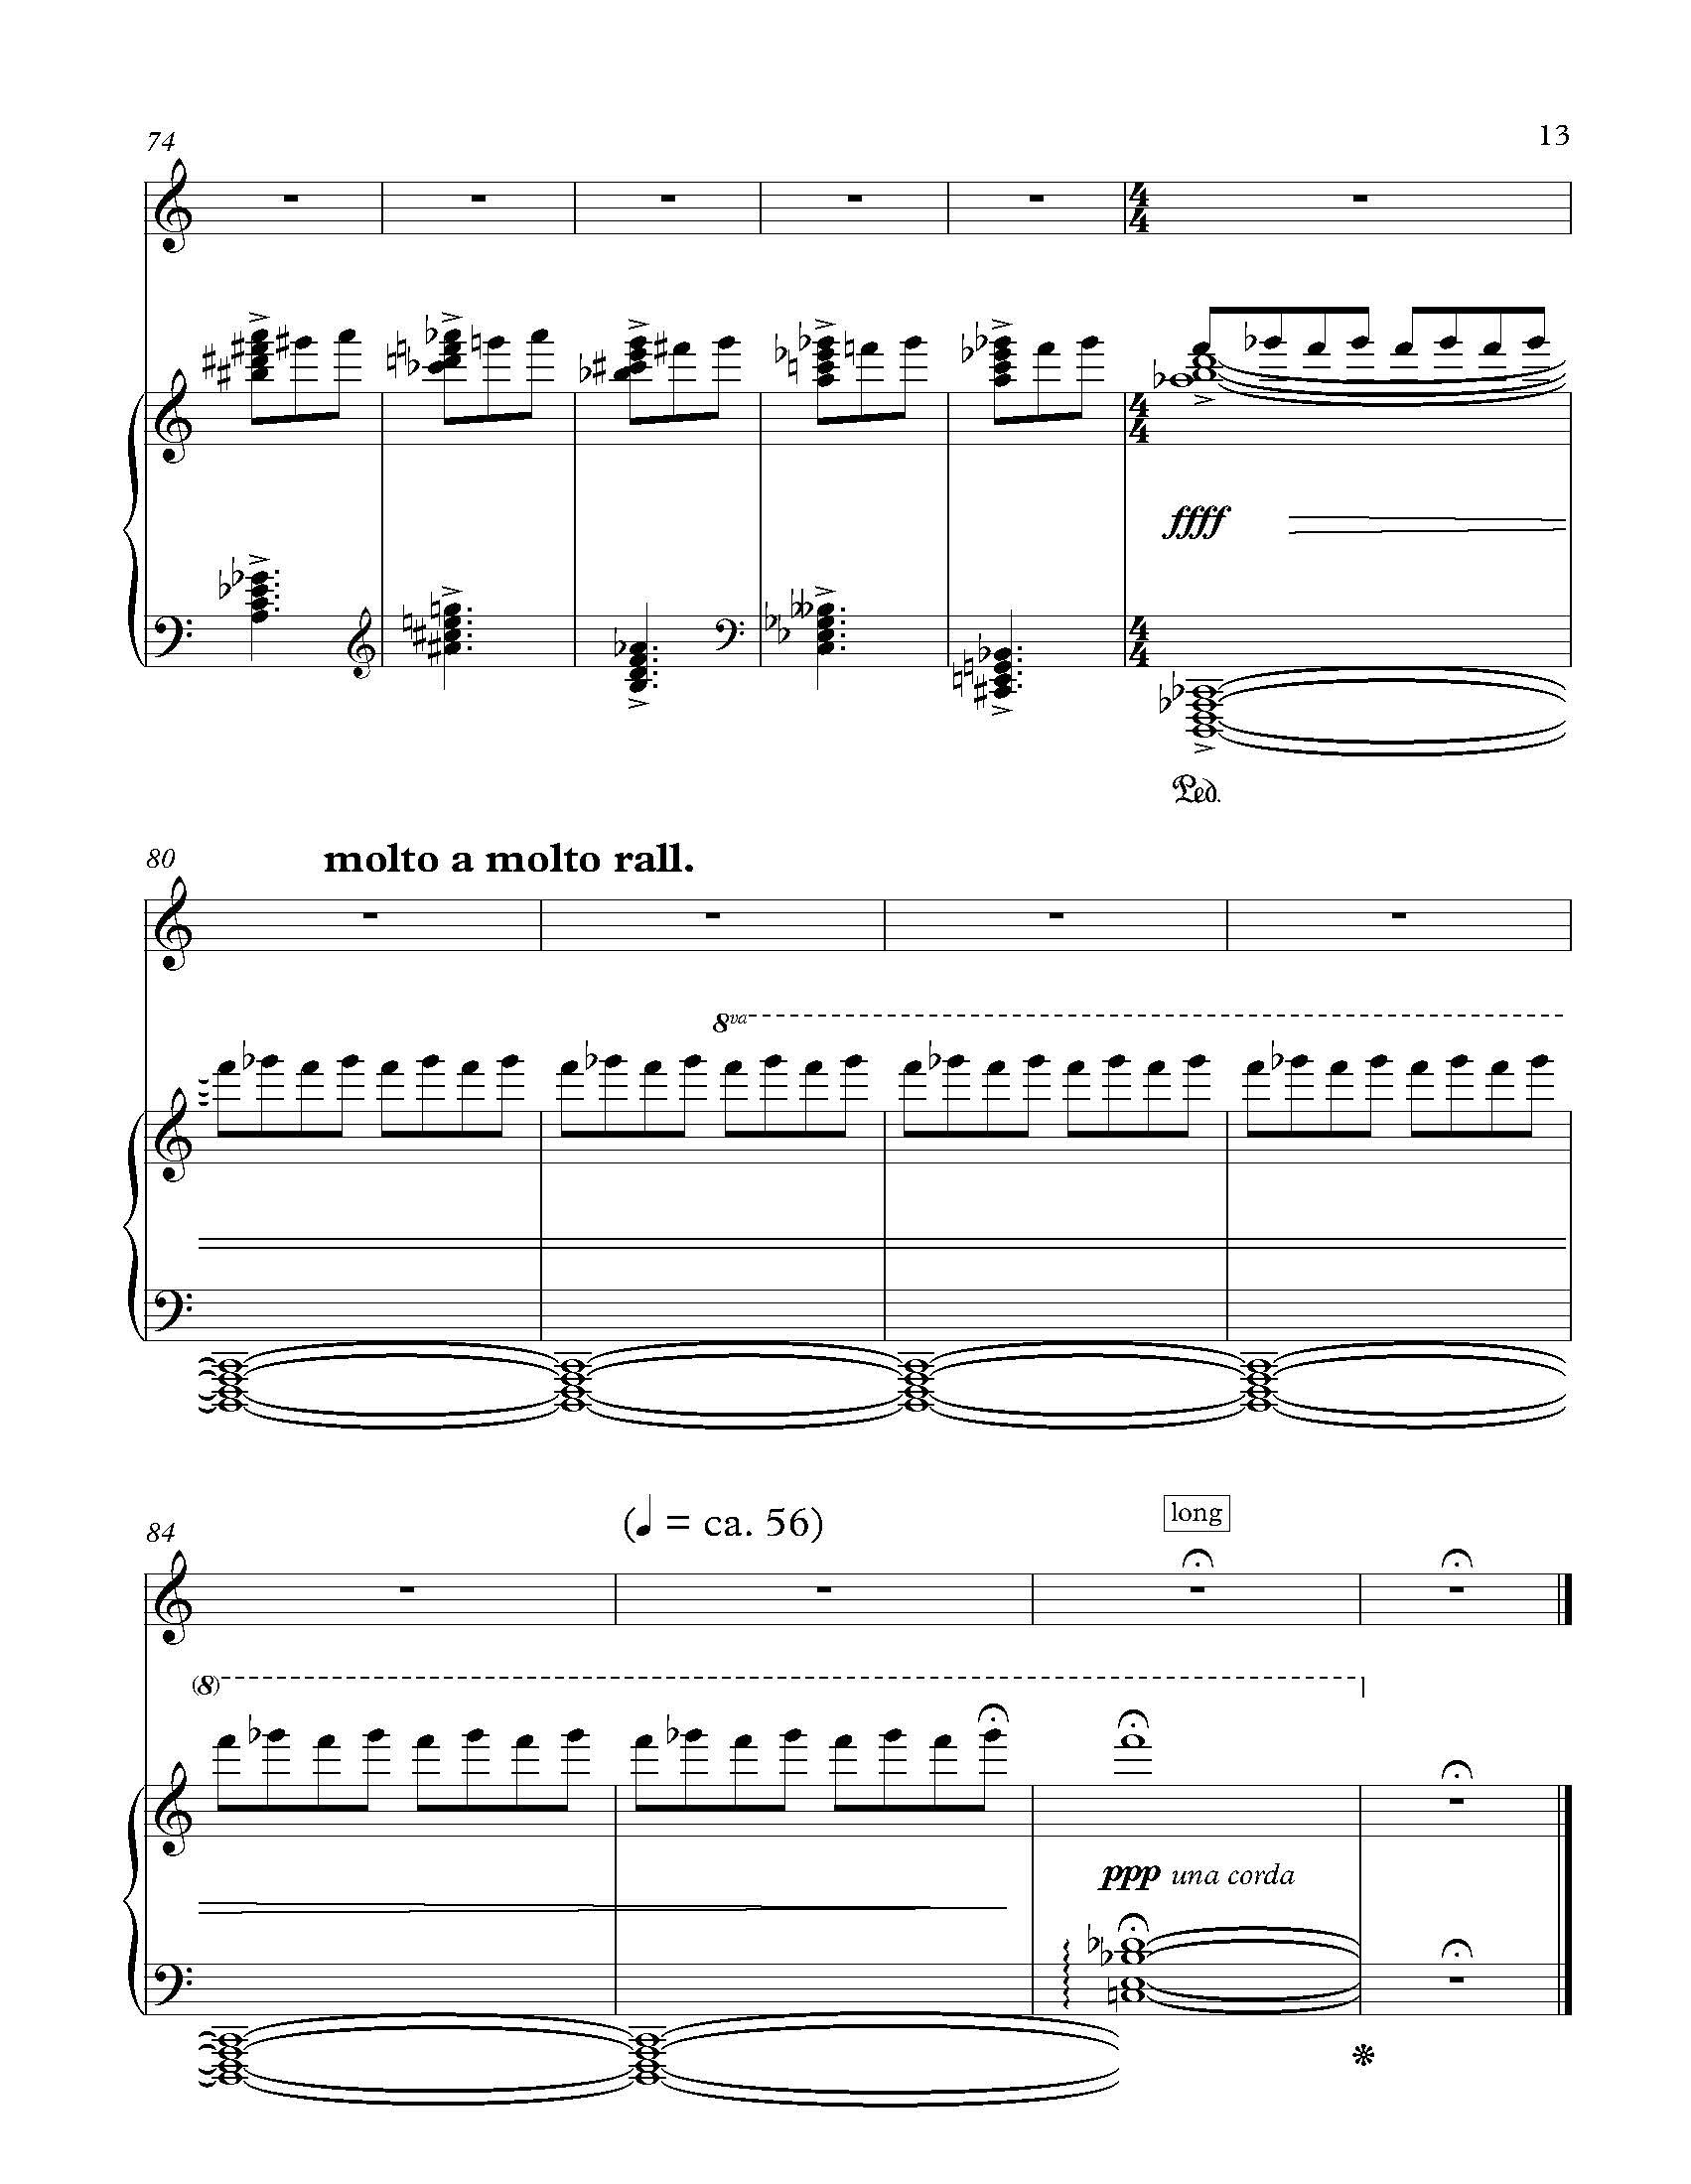 The Explosion - Complete Score_Page_19.jpg